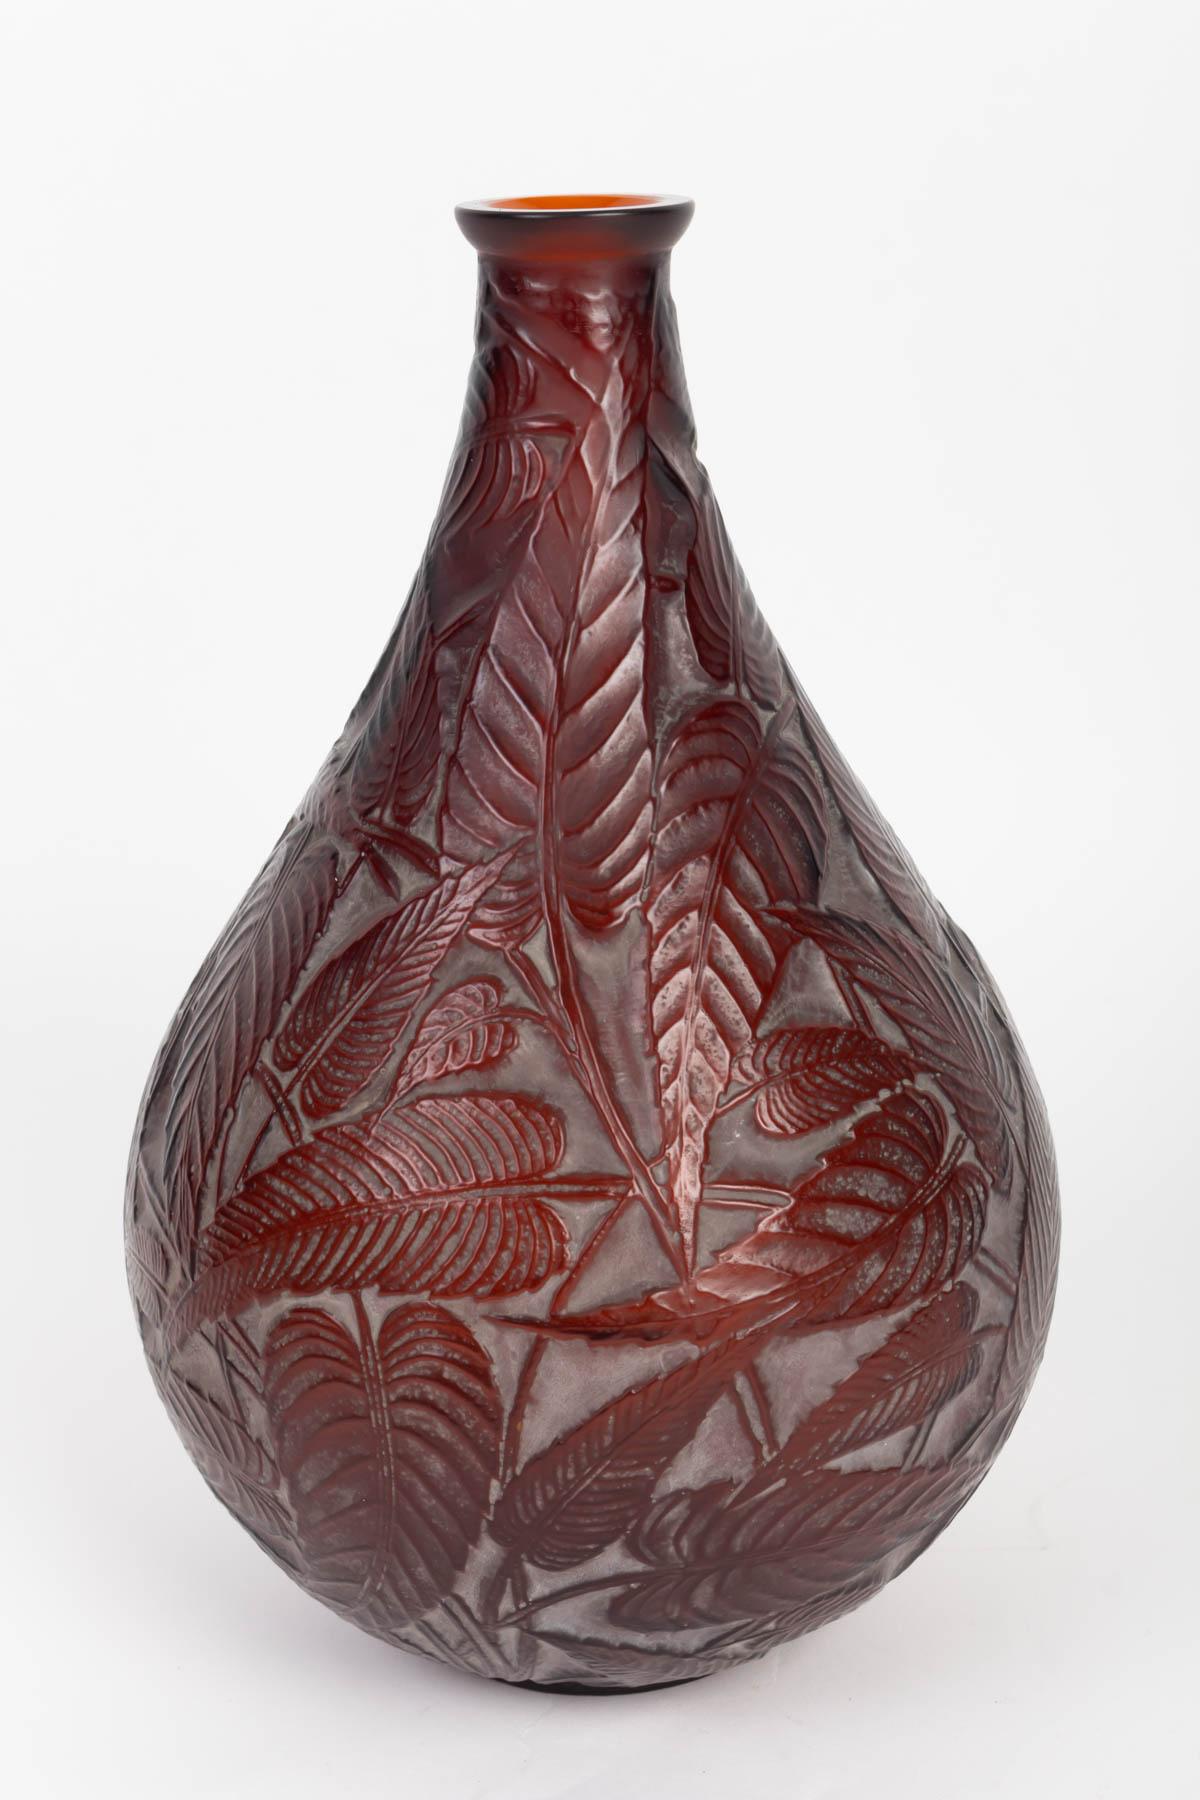 Molded 1923 René Lalique Sauge Vase in Deep Amber Glass with White Patina Sage Leaves